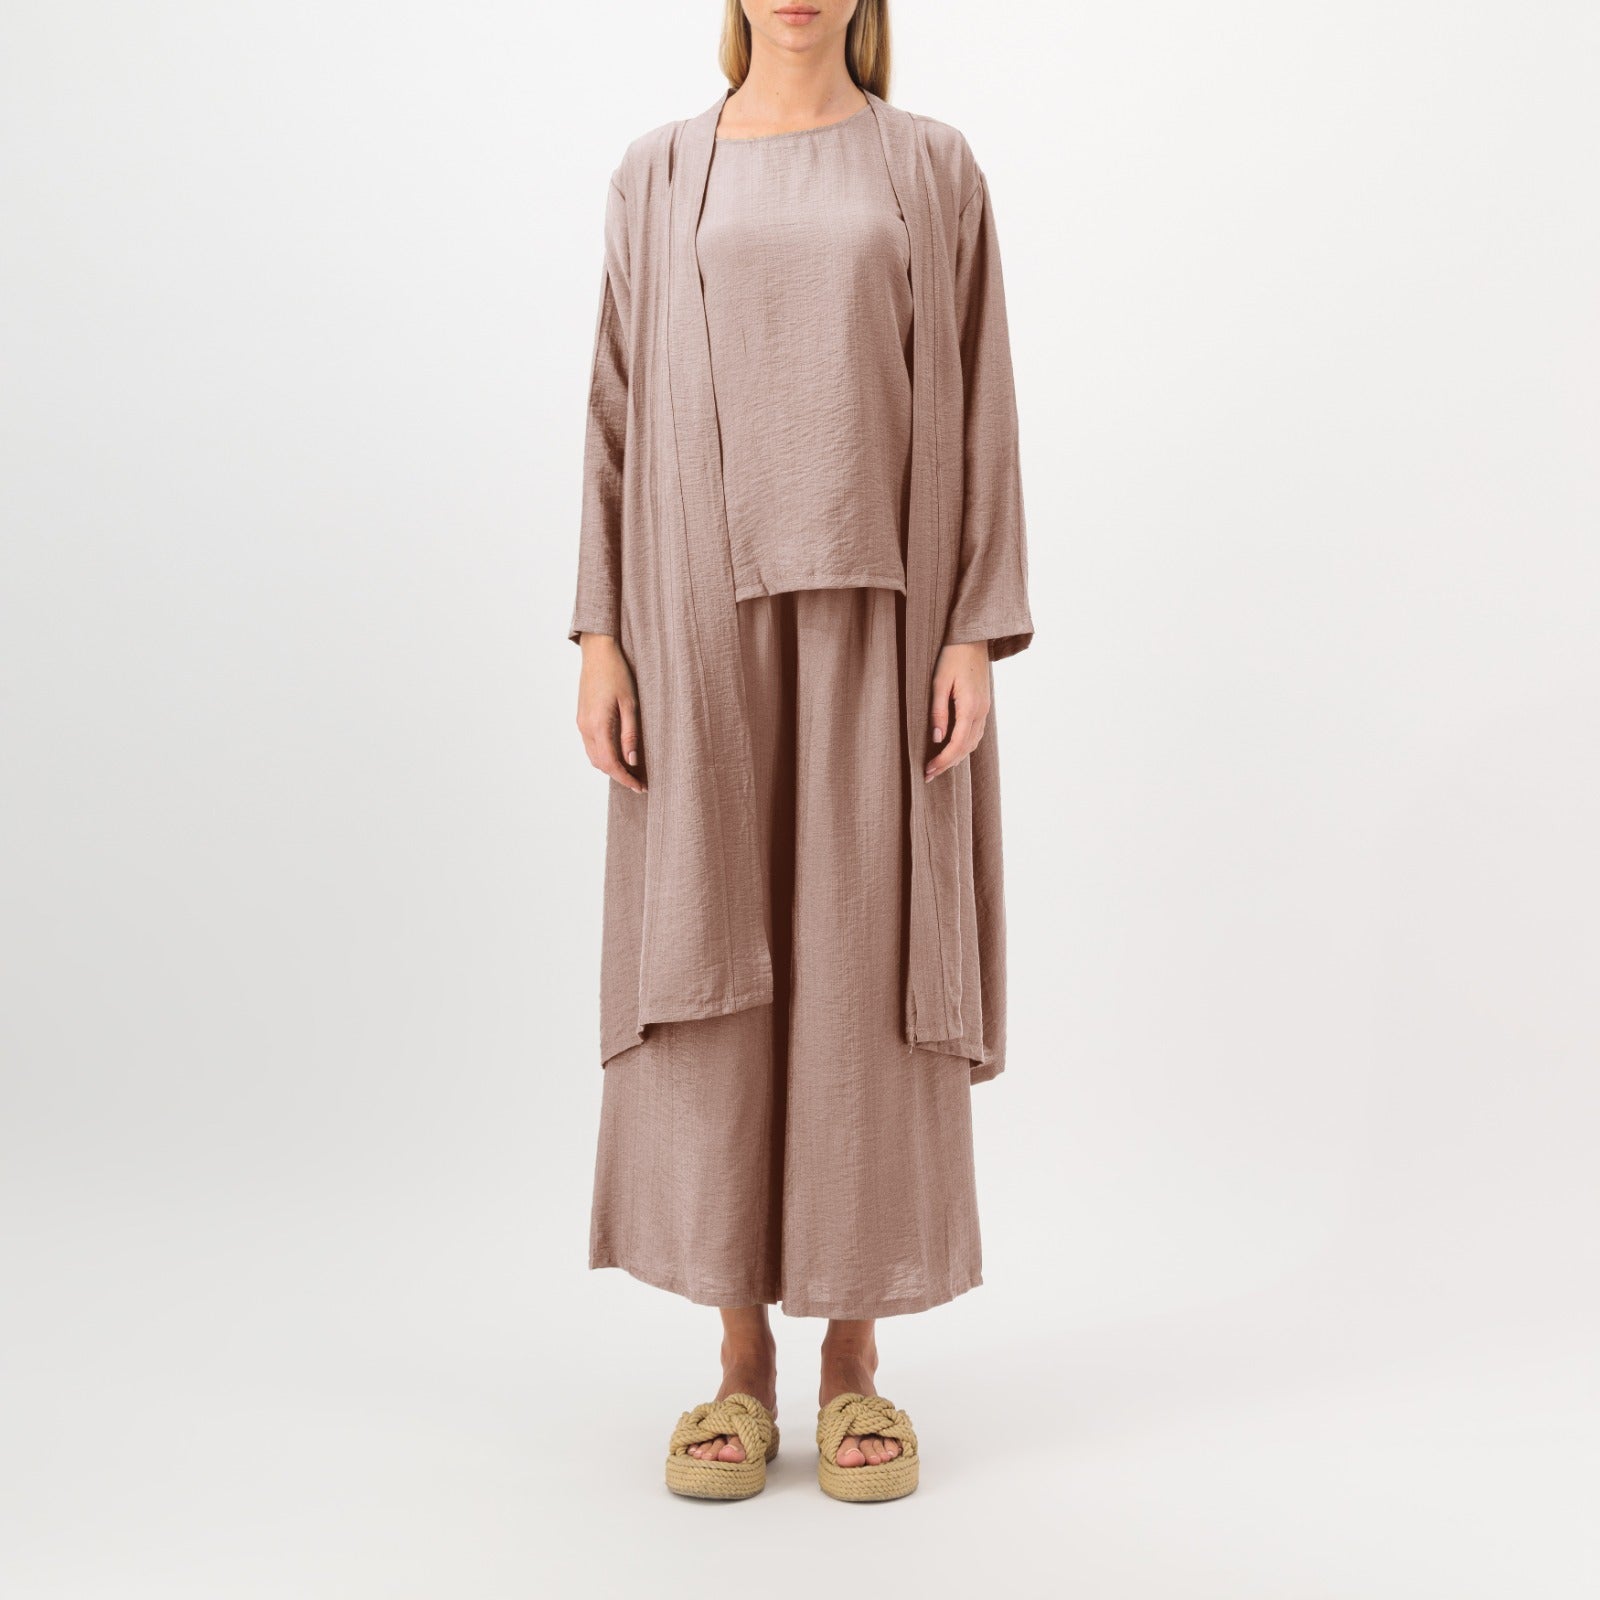 Light Brown Outfit  - All Day Casual Set of 3 - Comfortable style in attractive colors - arabian outfit - casual setcasual set - all day outfits - closet fashion store